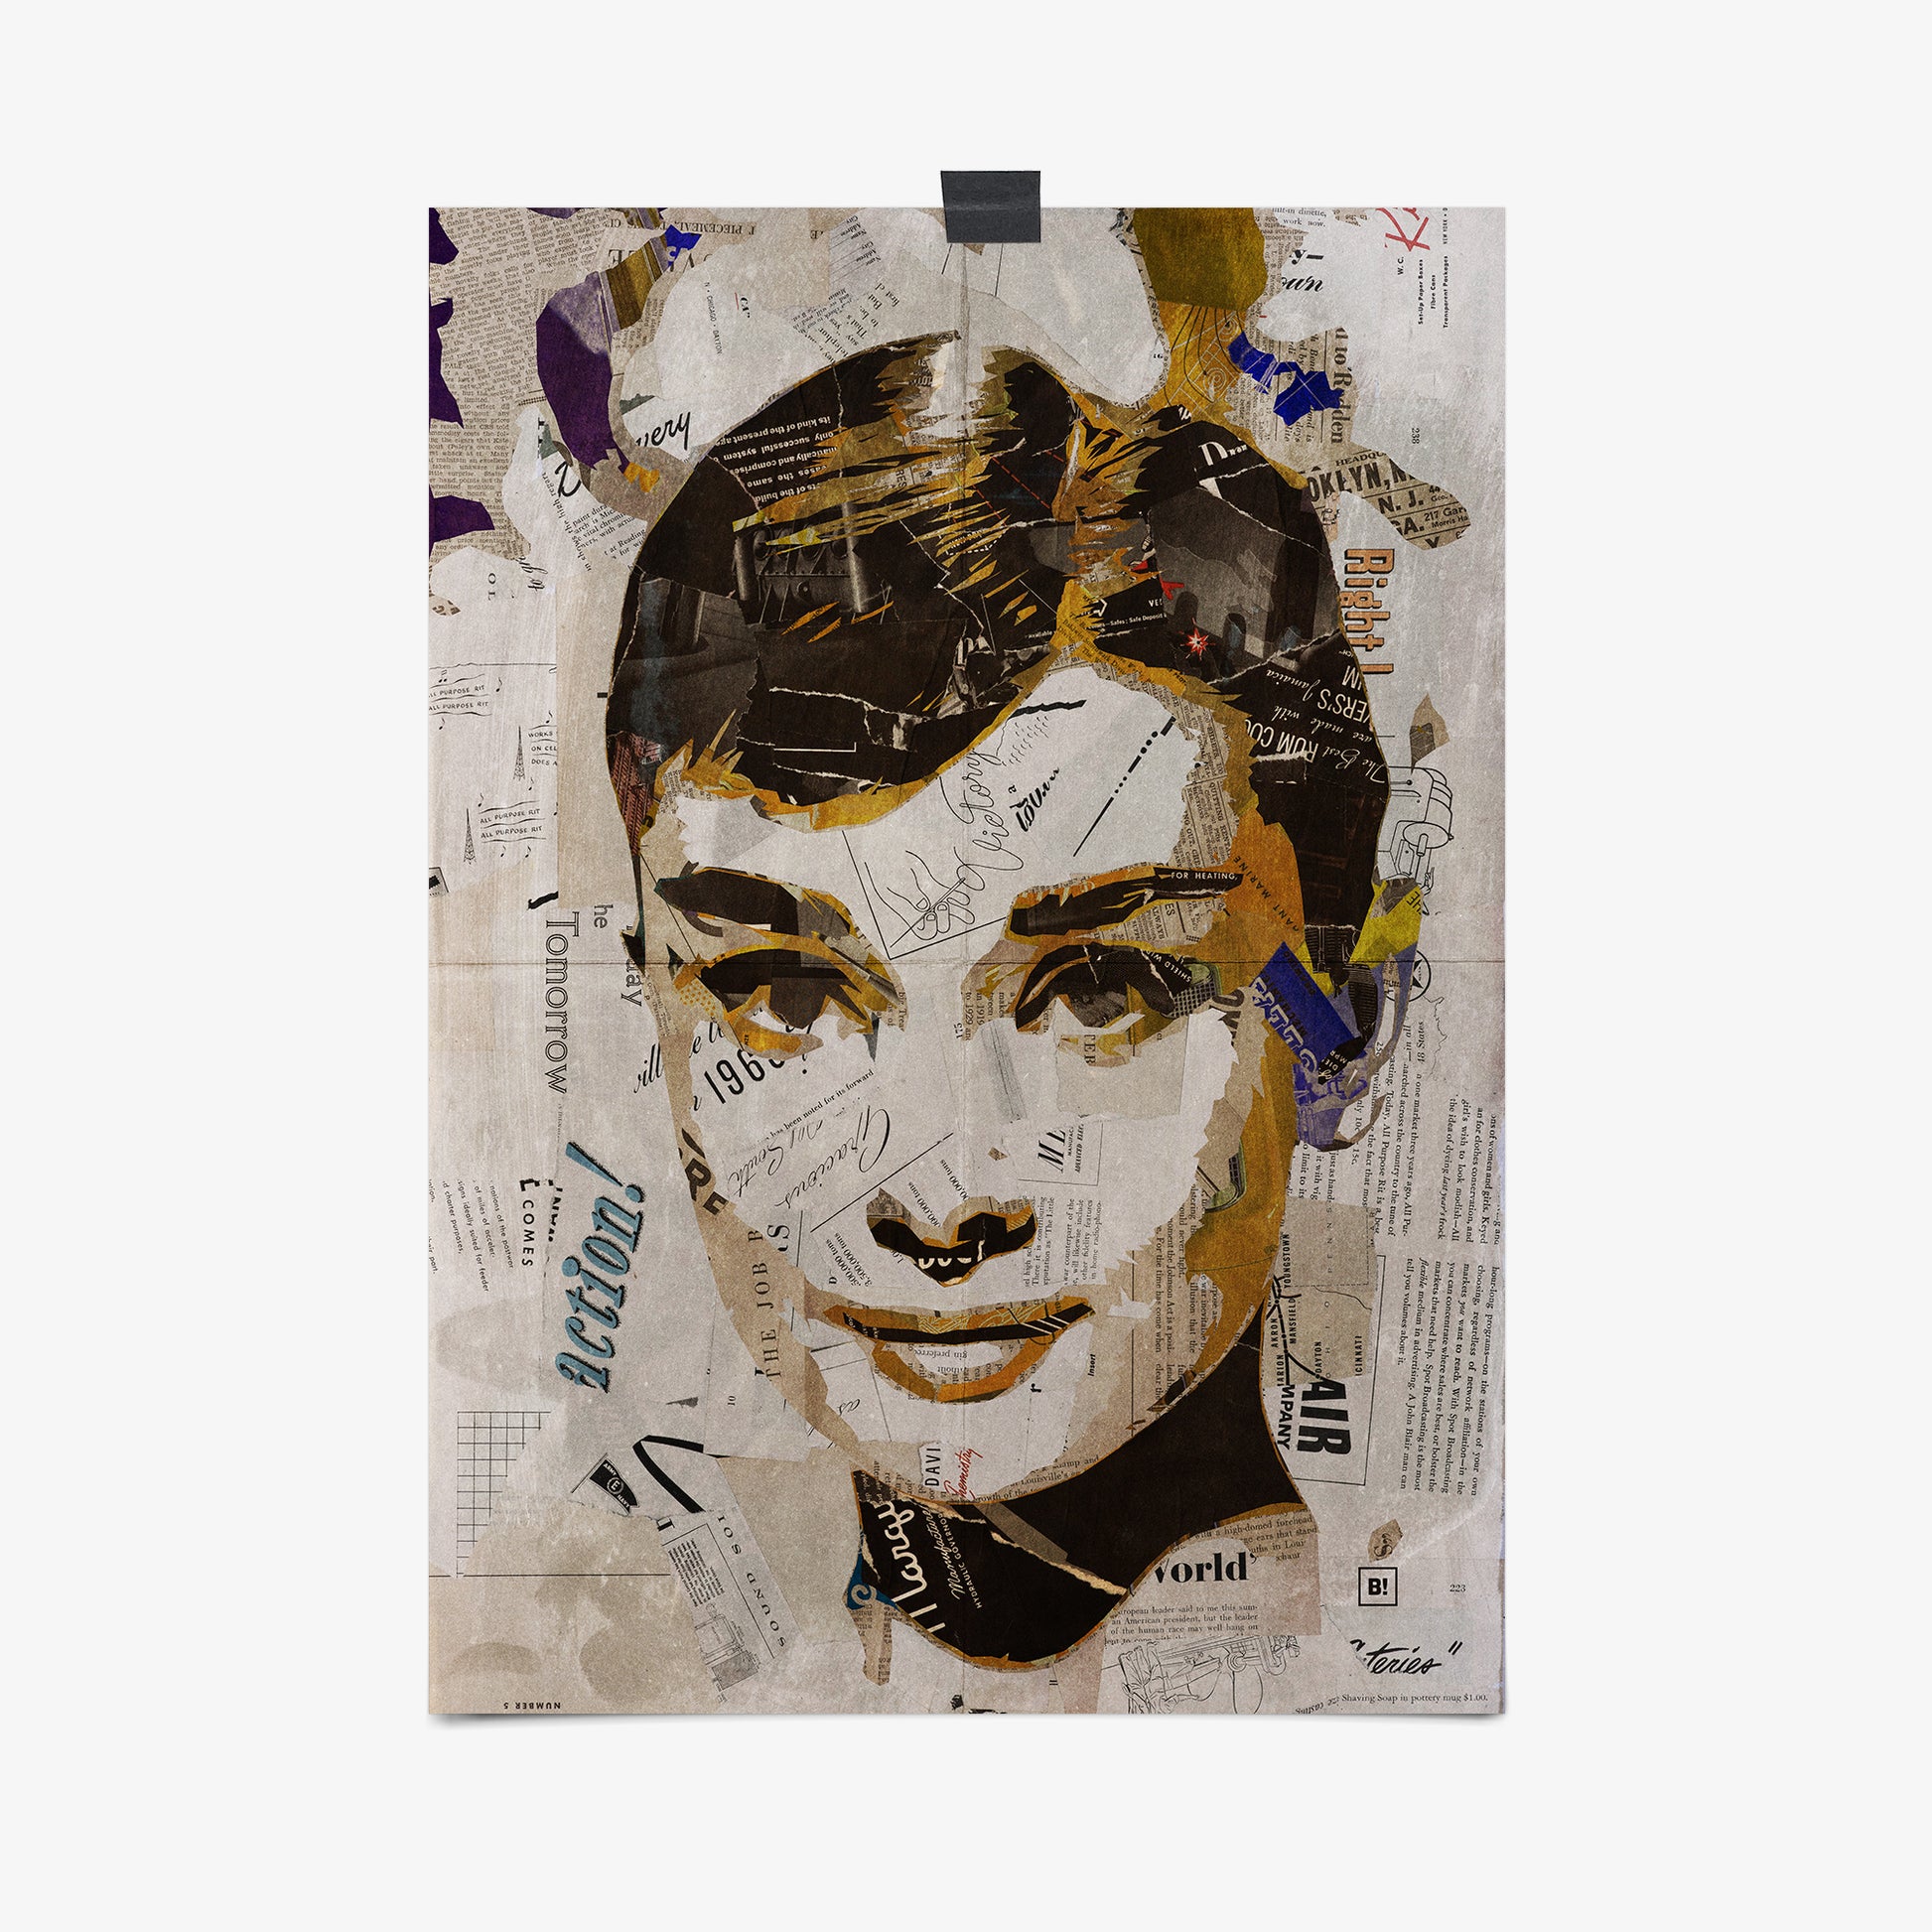 Be inspired by our iconic collage portrait art print of Audrey Hepburn. This artwork was printed using the giclée process on archival acid-free paper, capturing its timeless beauty in every detail.